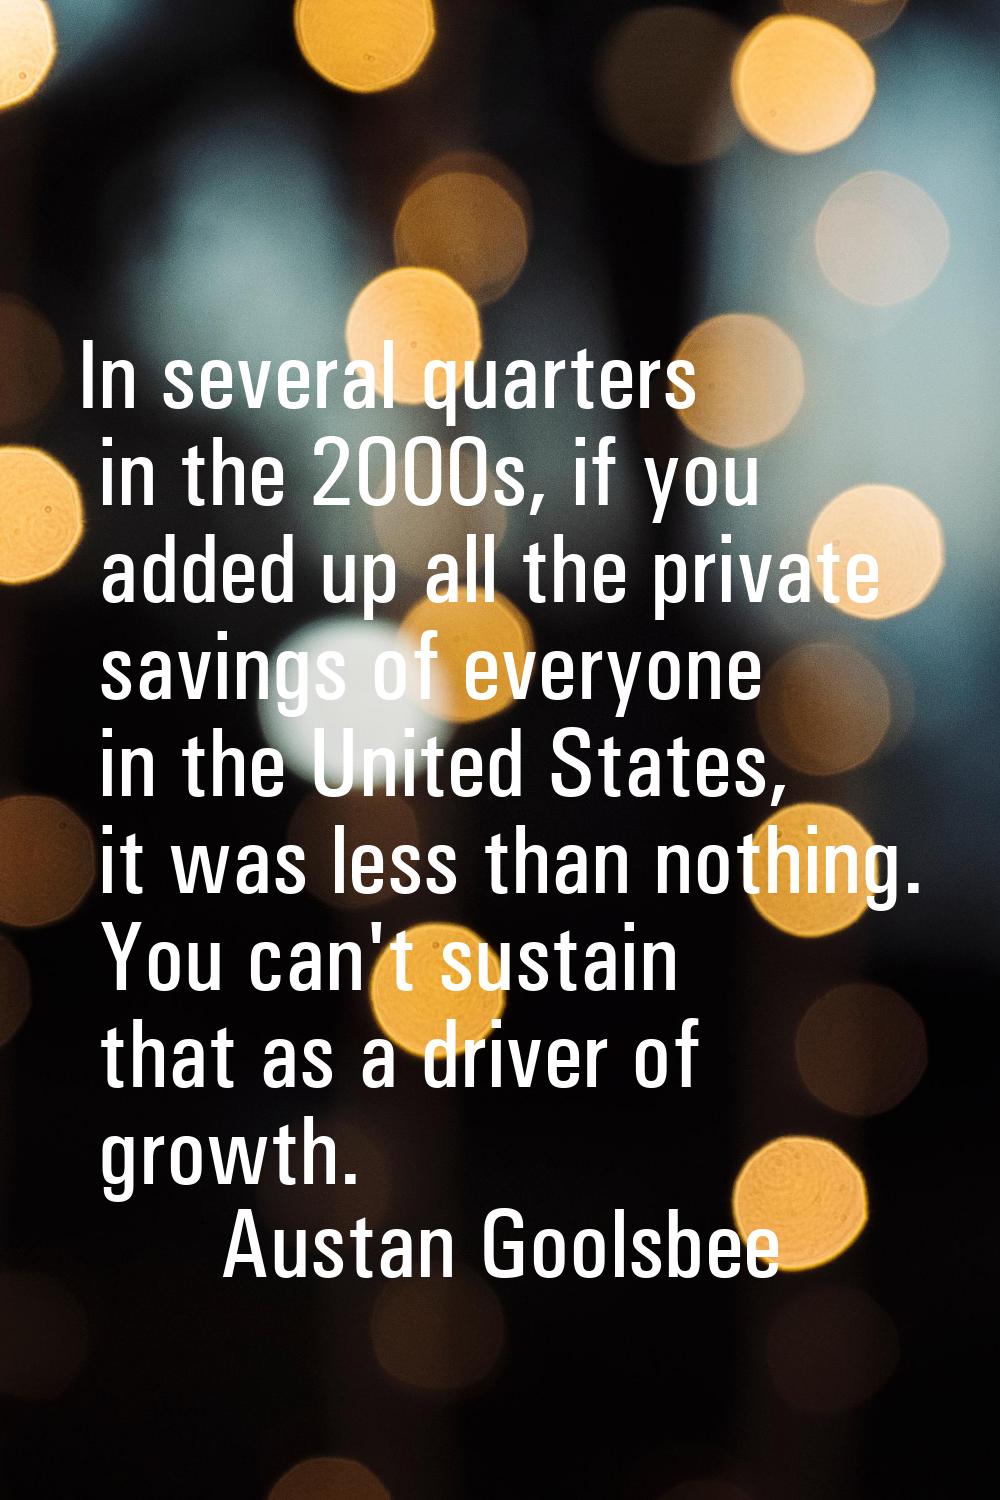 In several quarters in the 2000s, if you added up all the private savings of everyone in the United